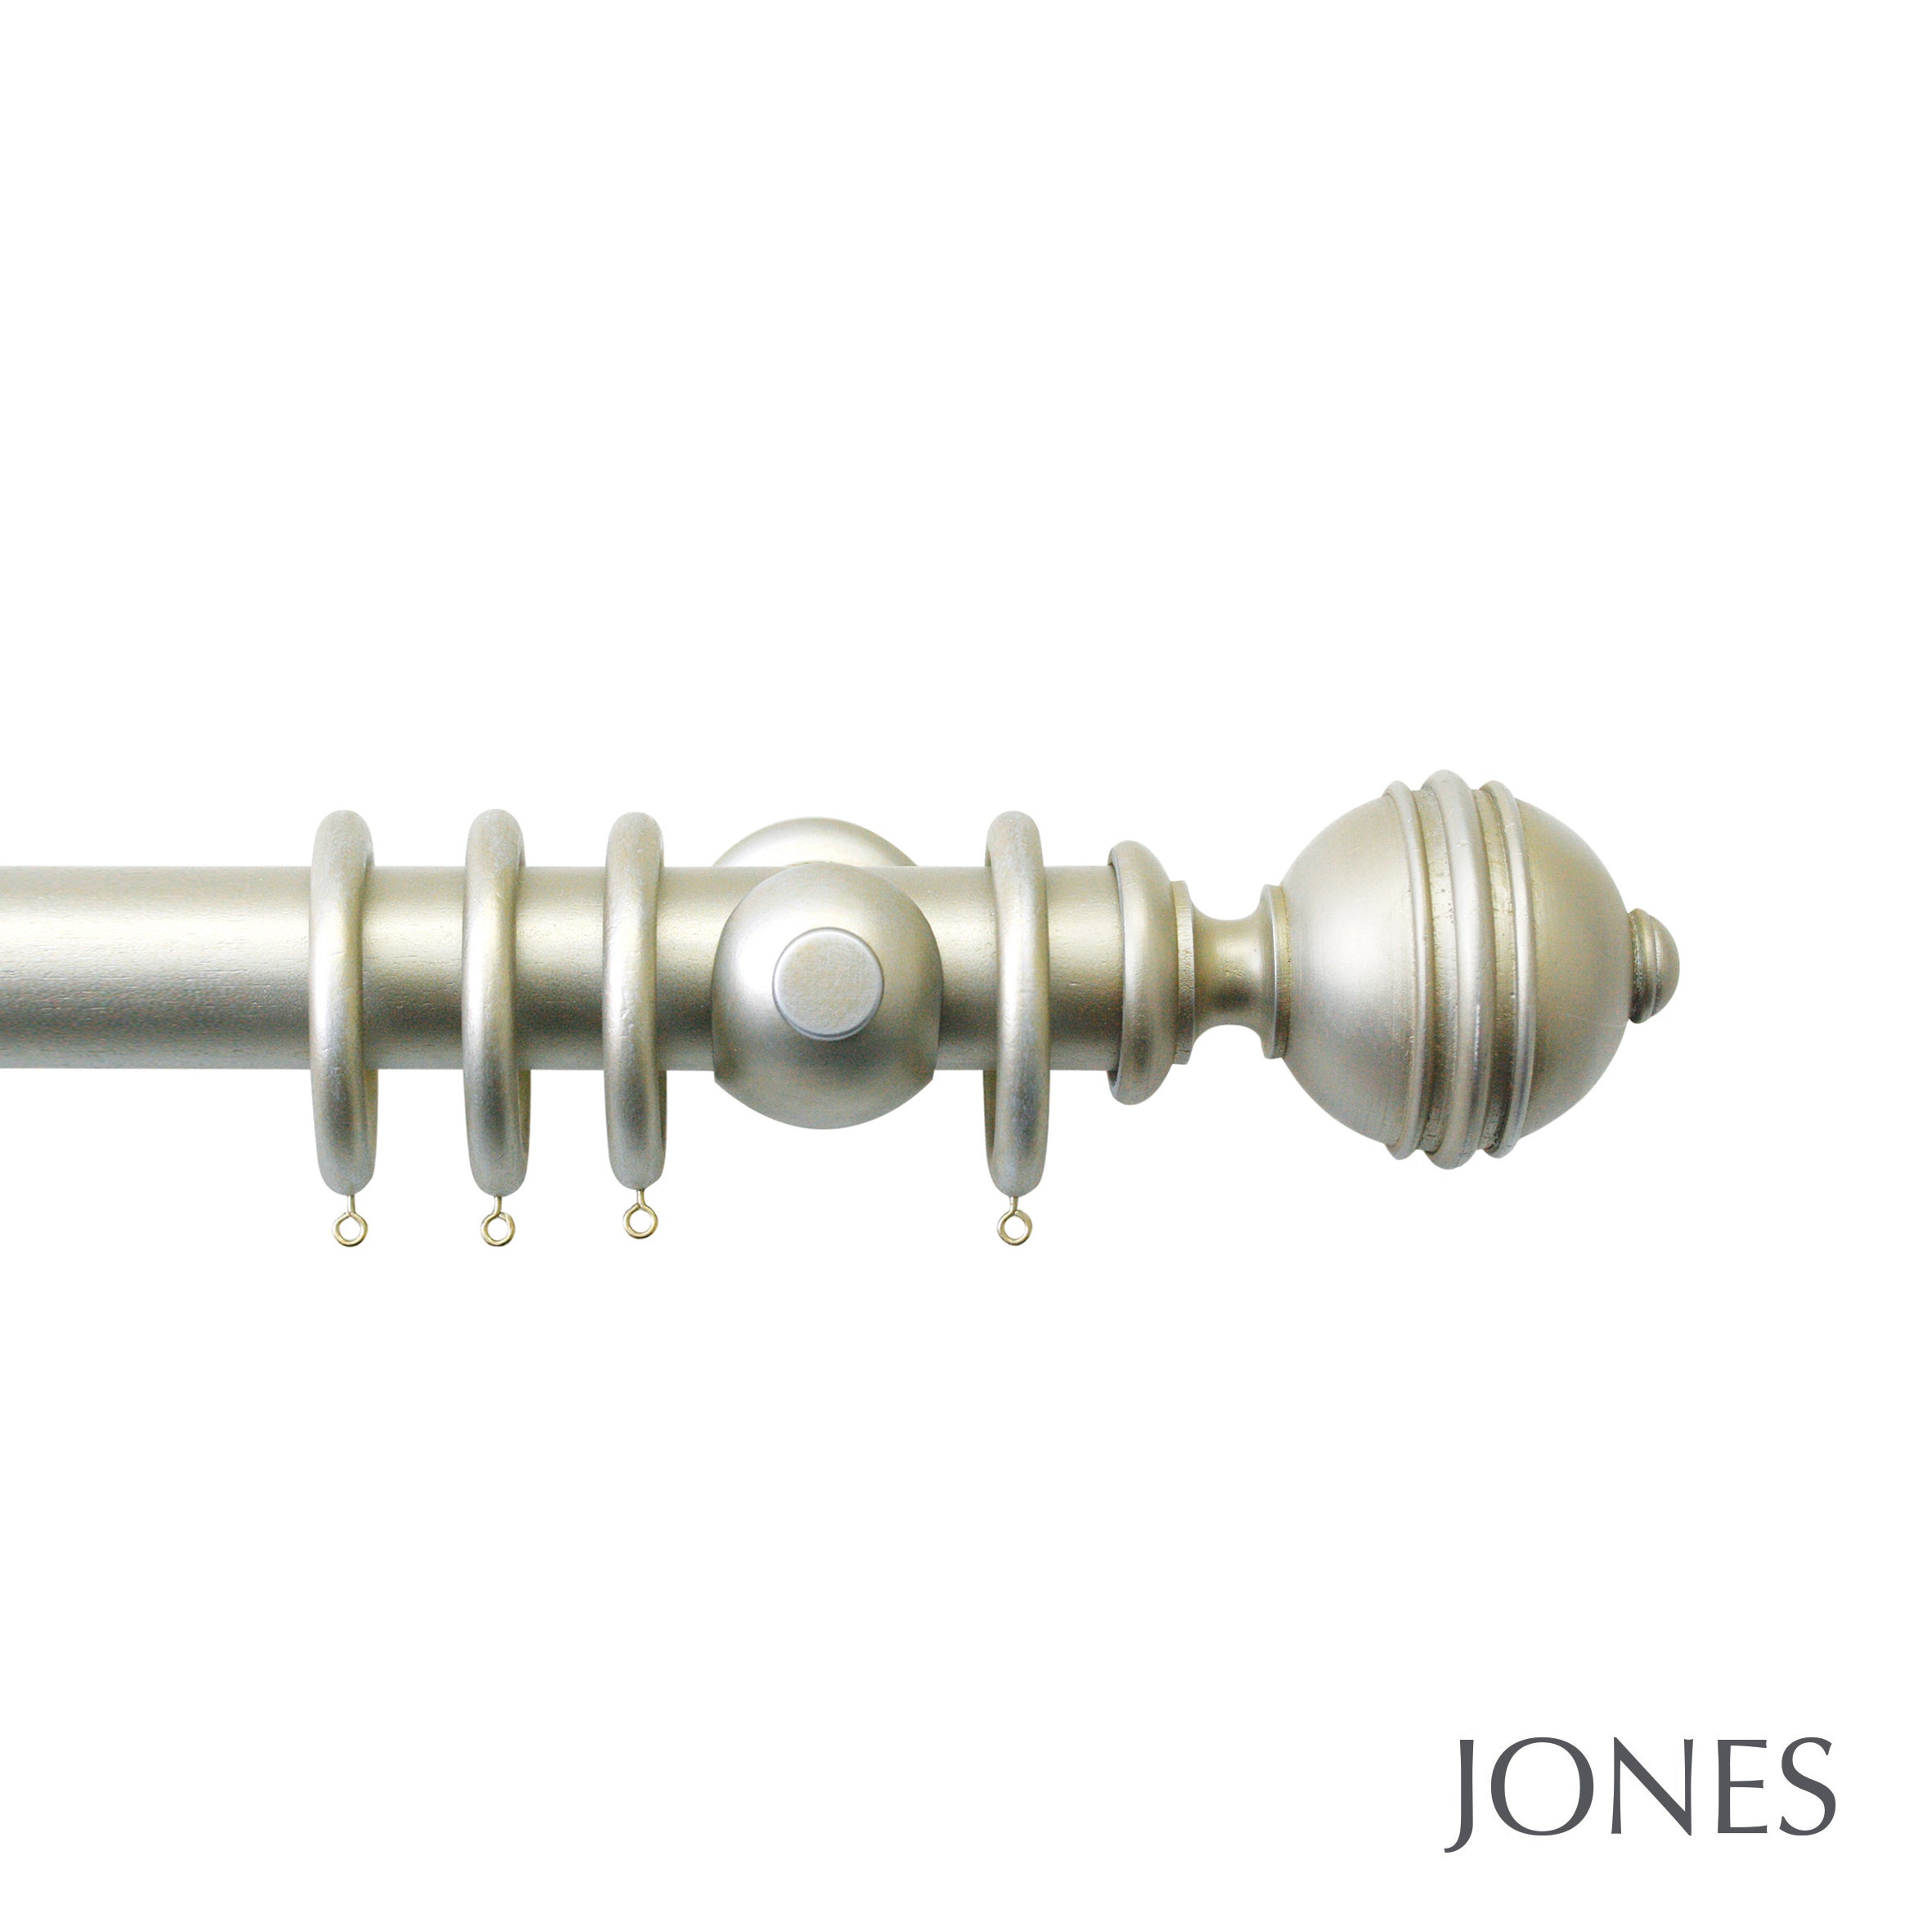 Jones Interiors Florentine Ribbed Ball Finial Curtain Pole Set in Champagne Silver